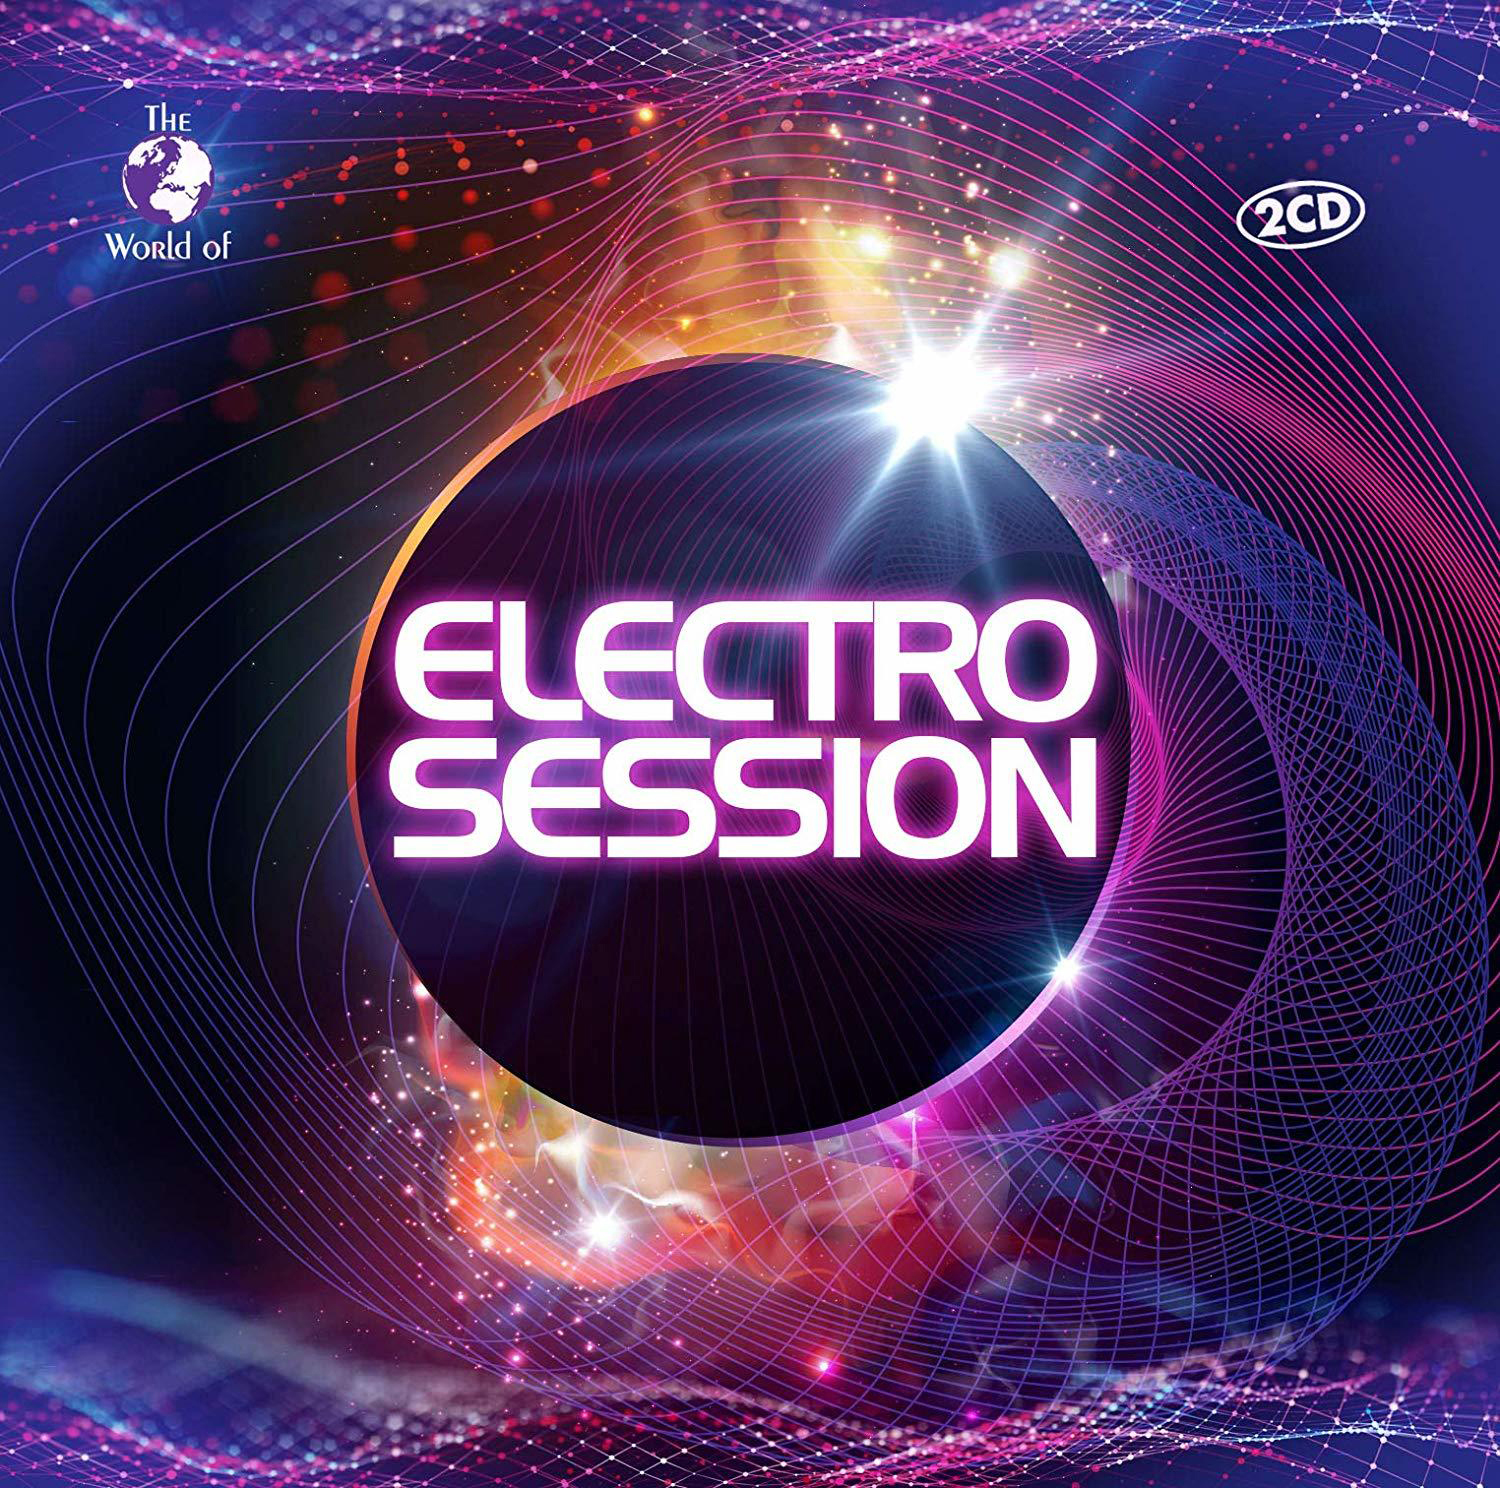 VARIOUS - Electro Session - (CD)